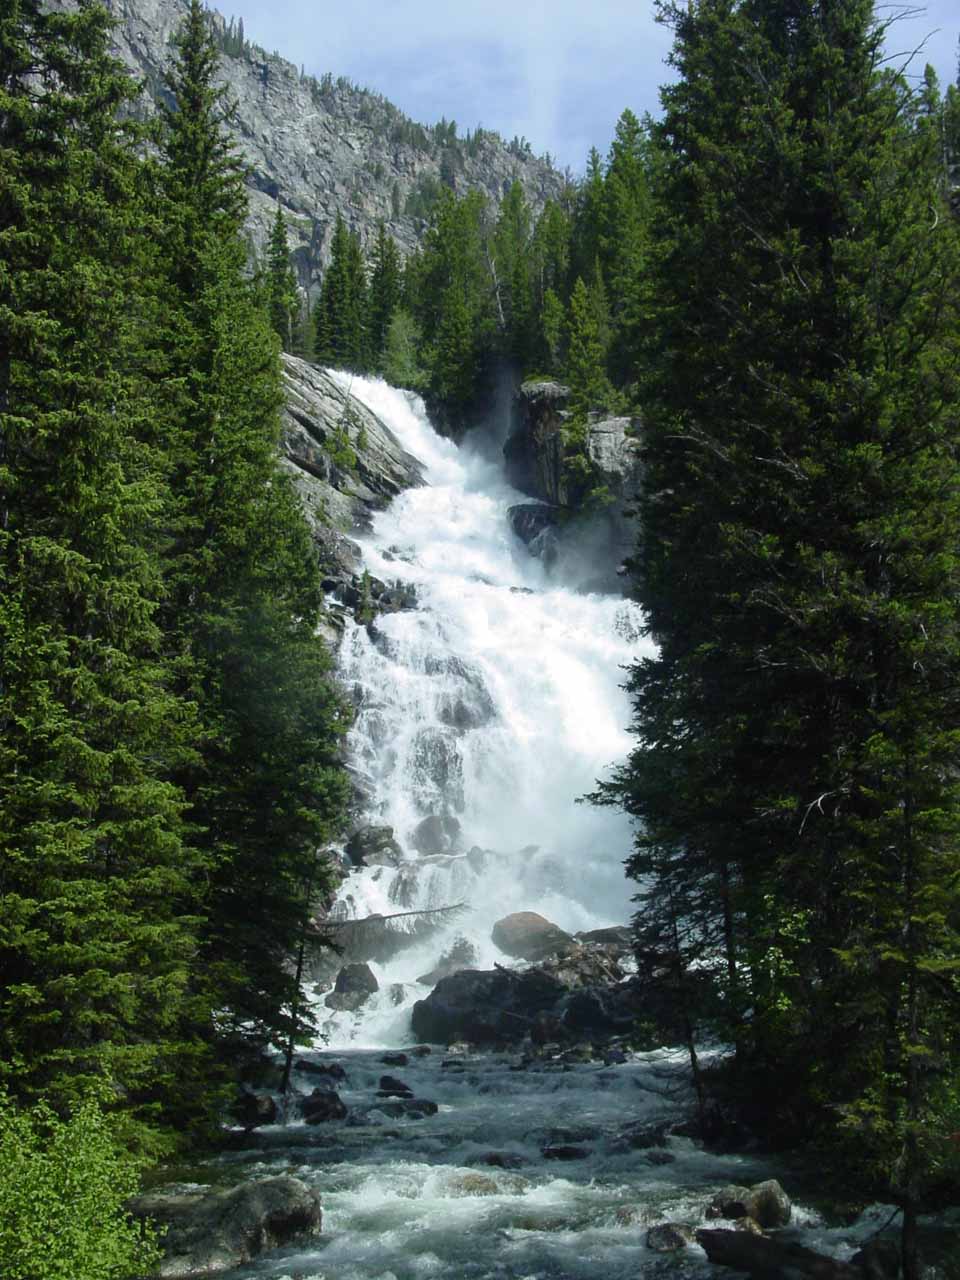 Hidden Falls - The Most Accessible Waterfall in Grand Tetons